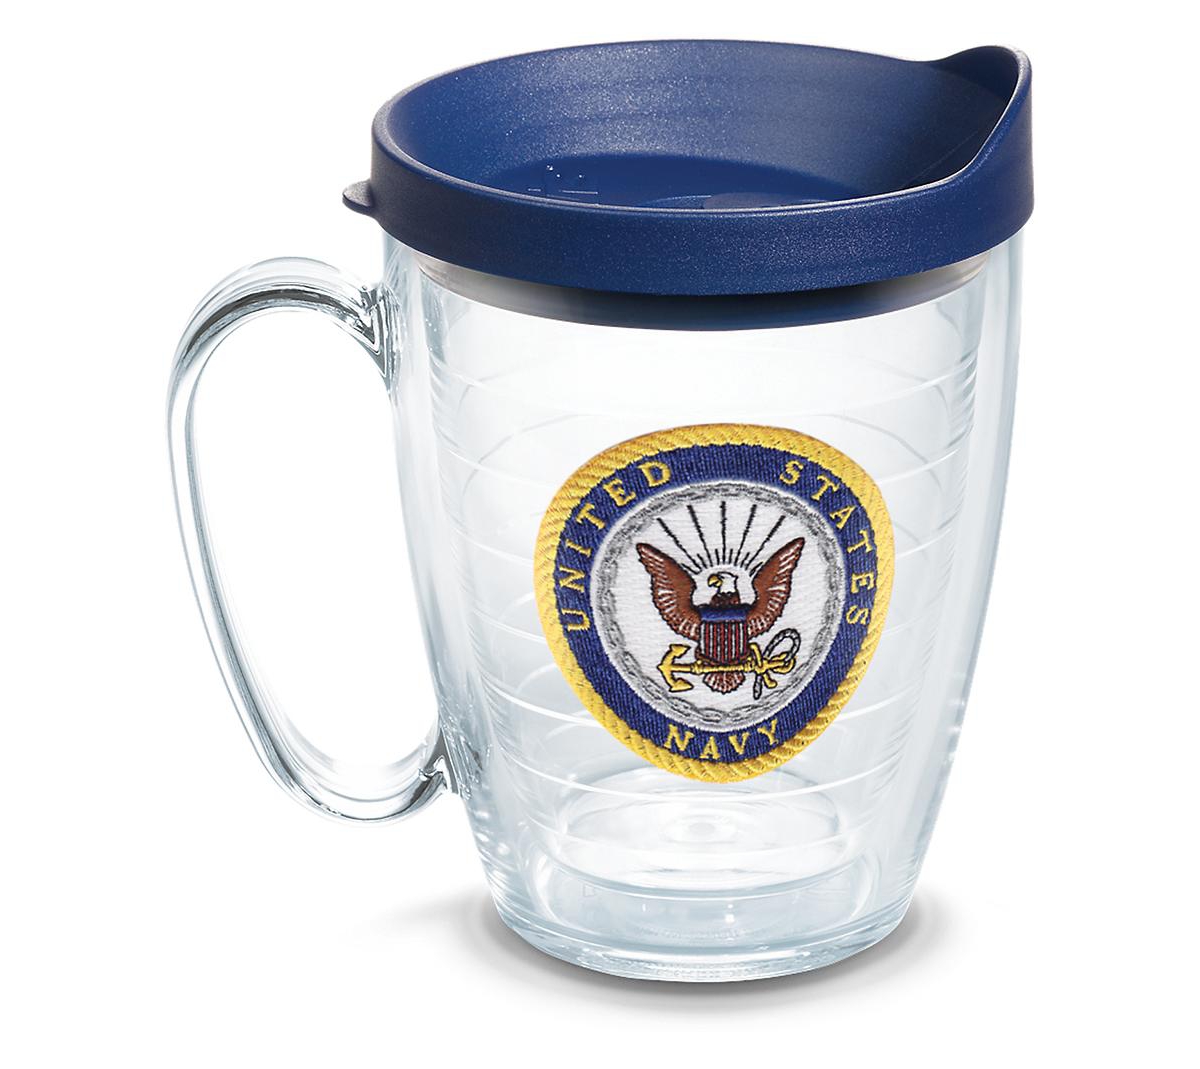 Tervis Tumbler Tervis Navy Logo Made In Usa Double Walled Insulated Tumbler Travel Cup Keeps Drinks Cold & Hot, 16o In Open Miscellaneous